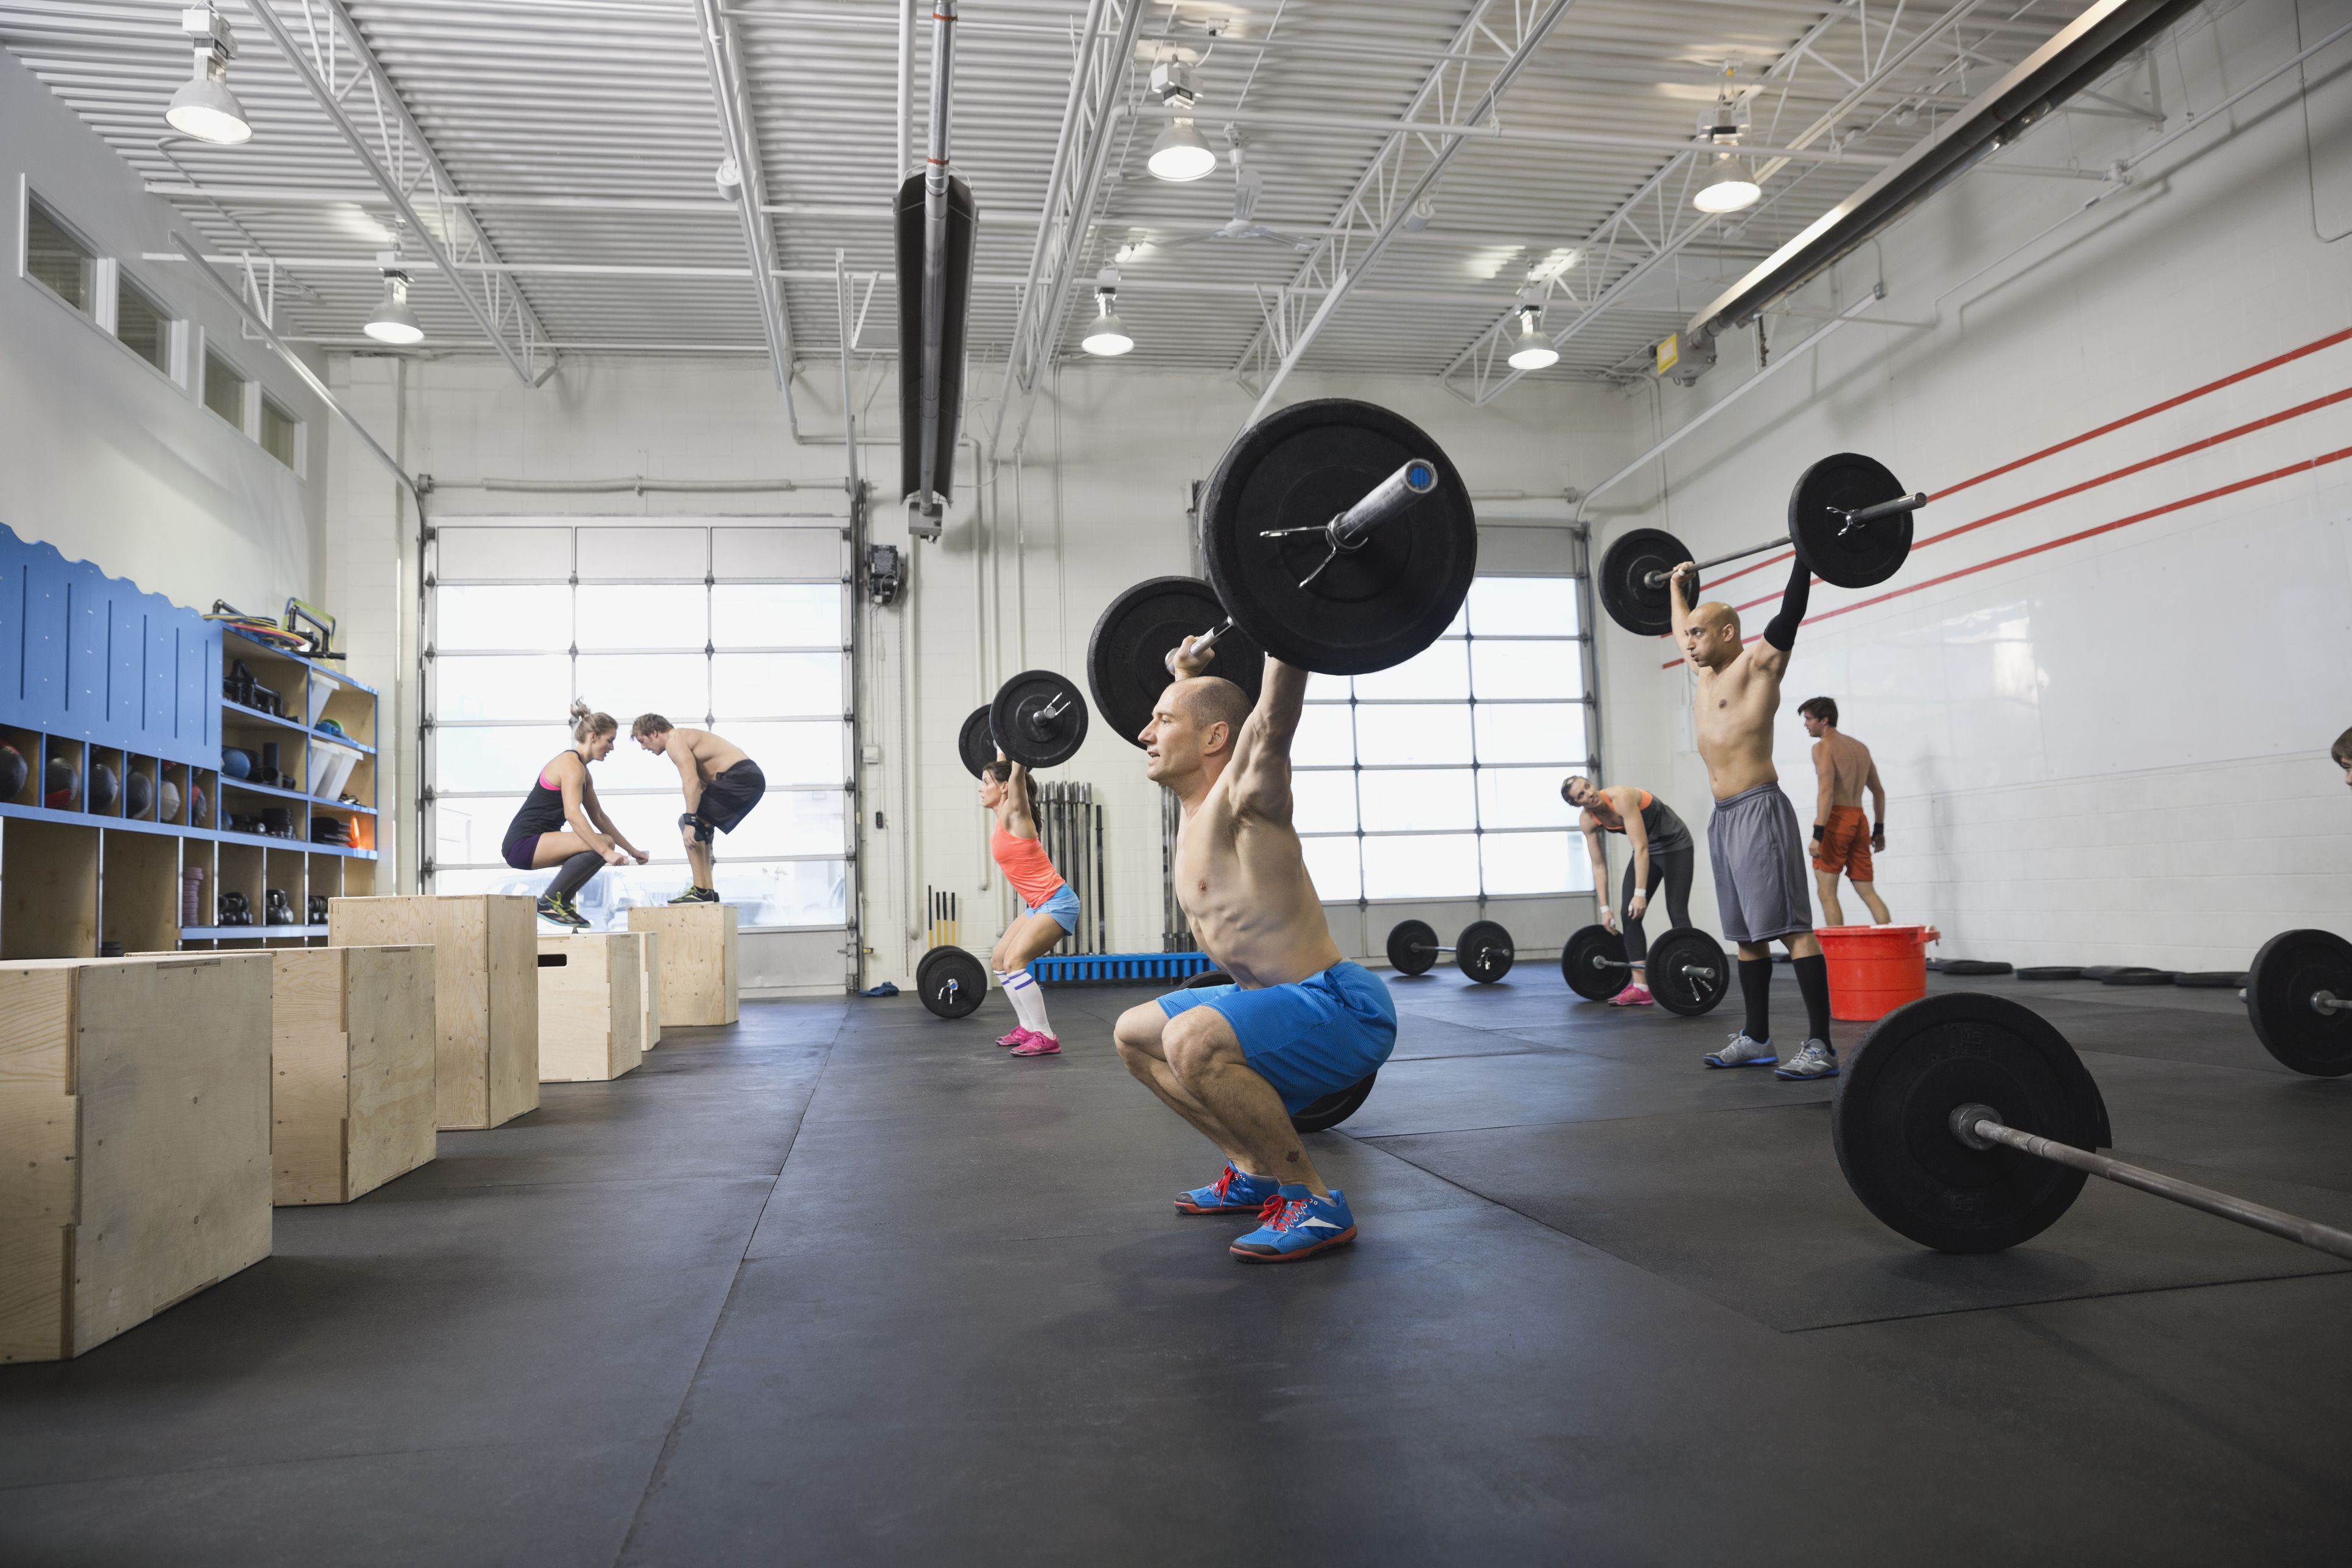 25 CrossFit Challenges You Can Use in Your Gym - Spark Membership